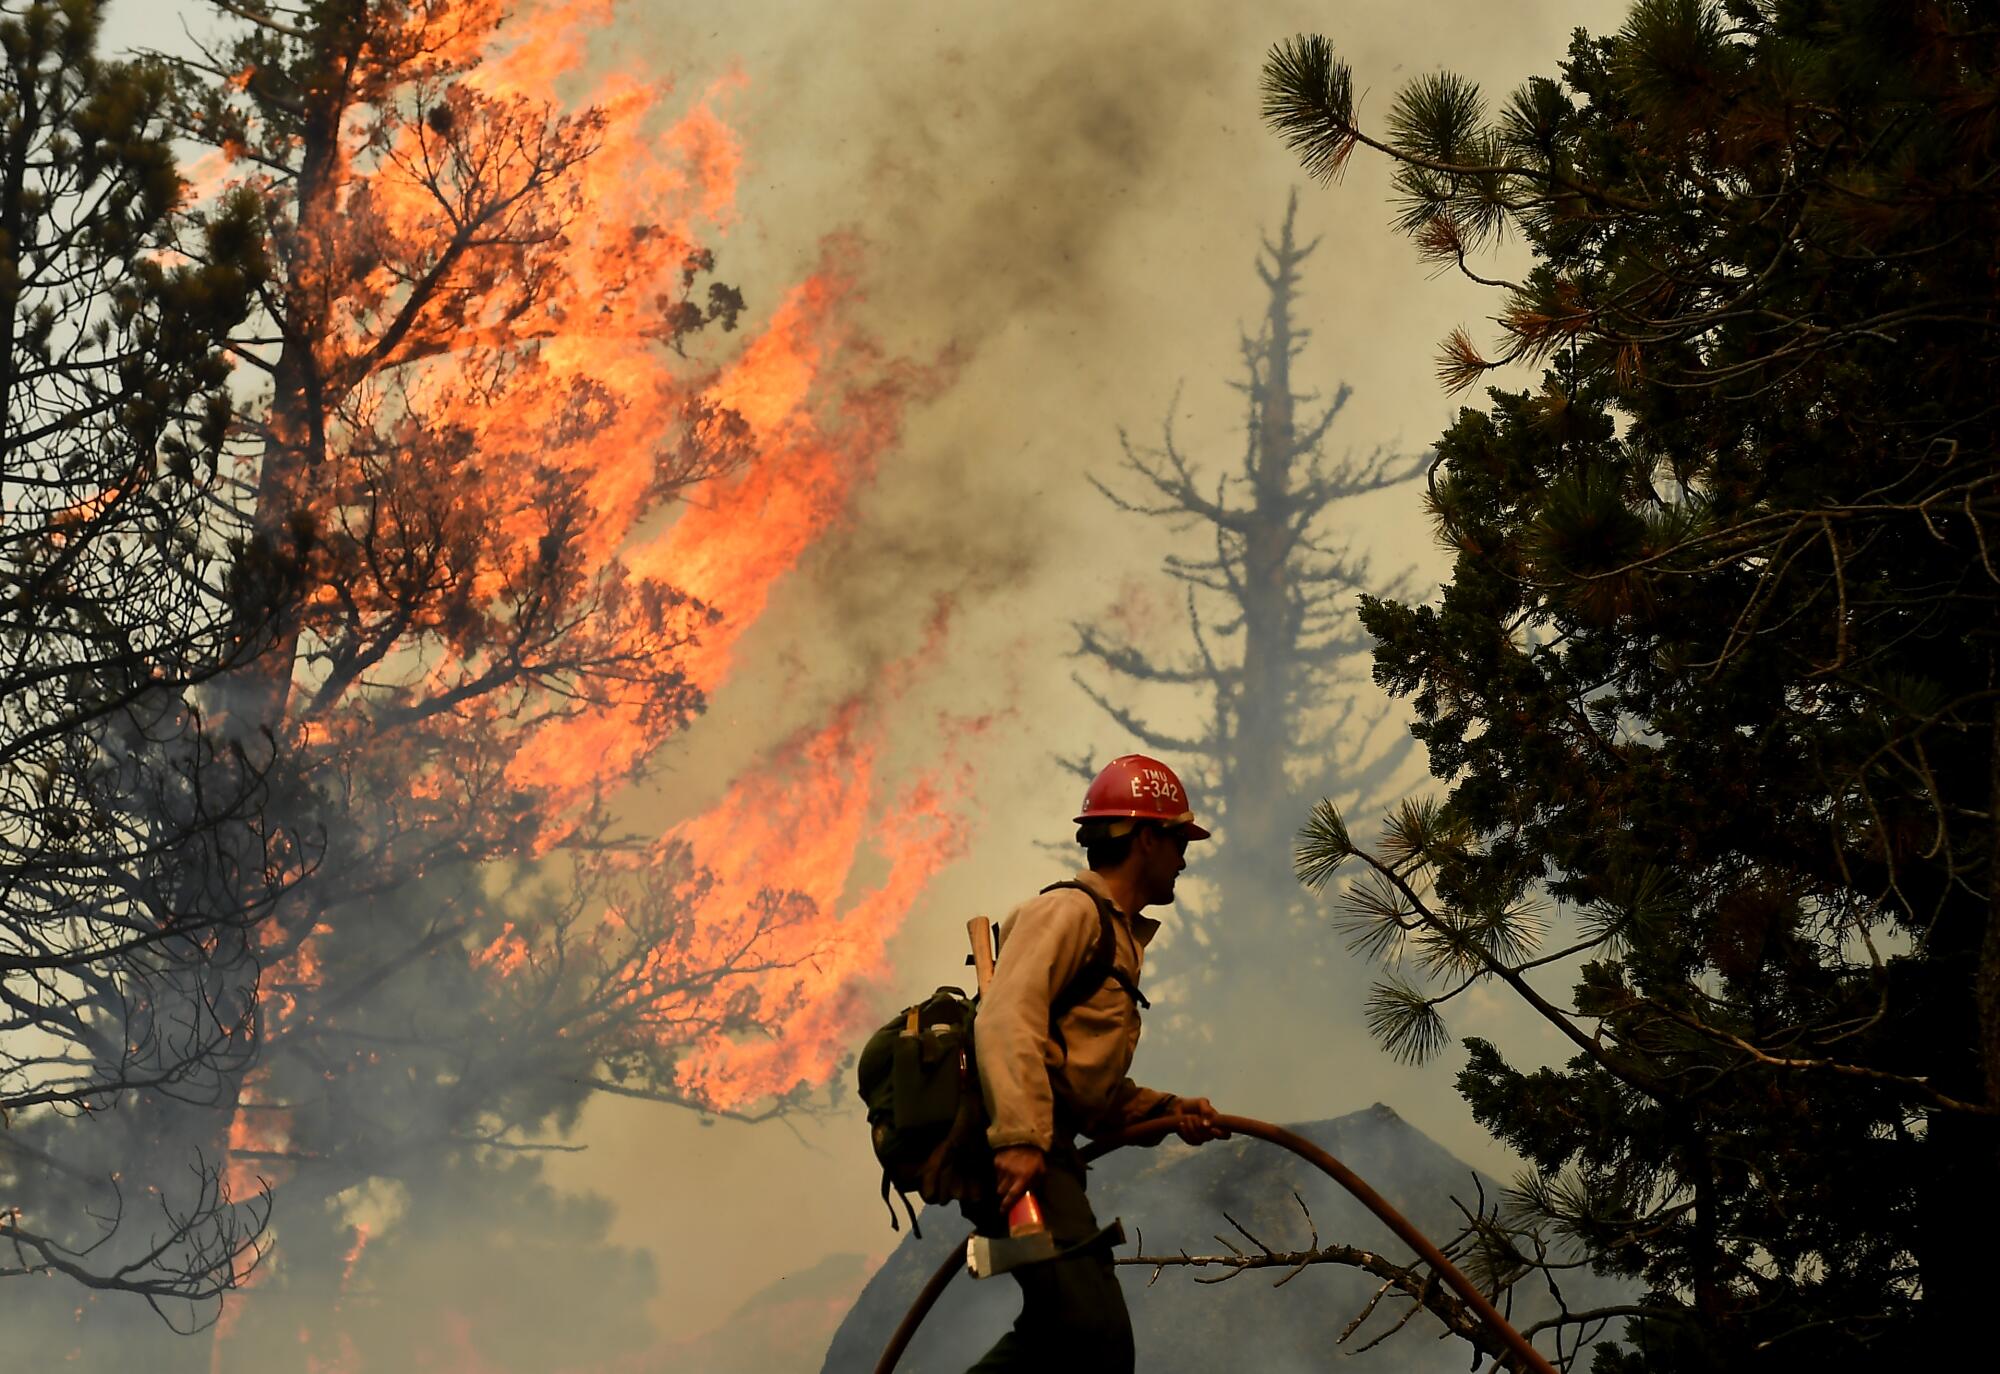 A firefighter carries hose in front of a tree on fire